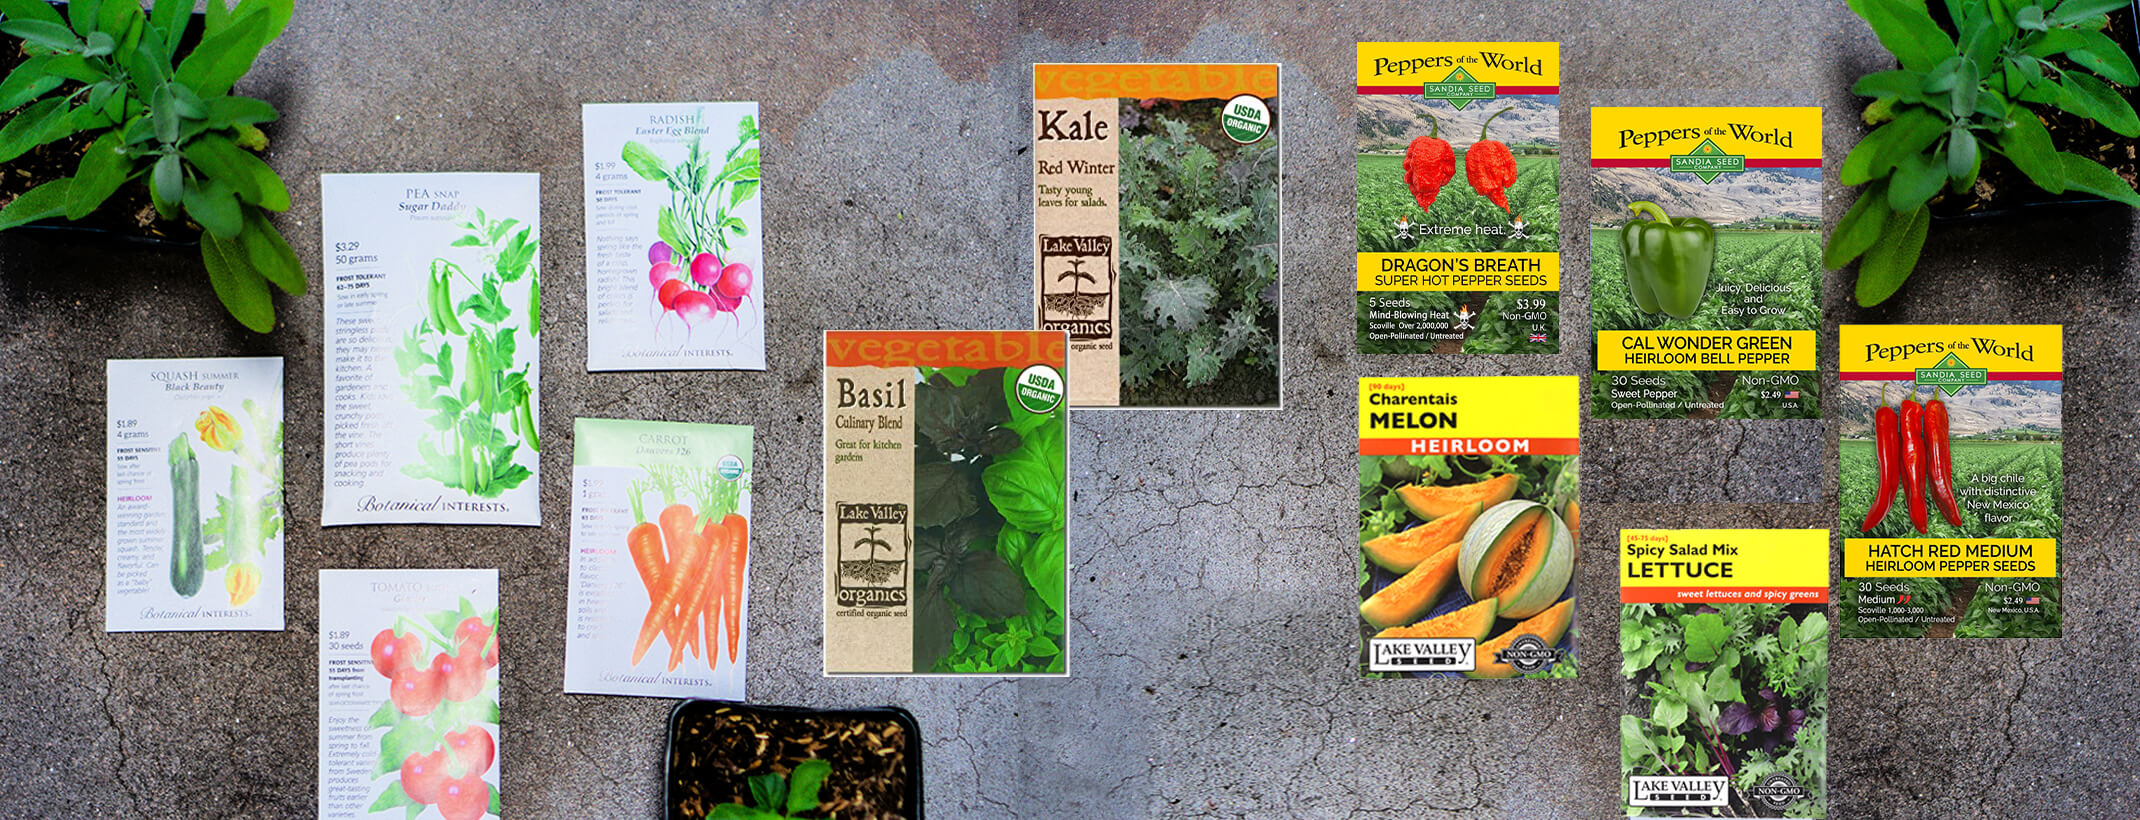 A variety of edible seed packets displayed on concrete near three plant starts - from Botanical Interests, Lake Valley Seed Company and Sandia Seed Company